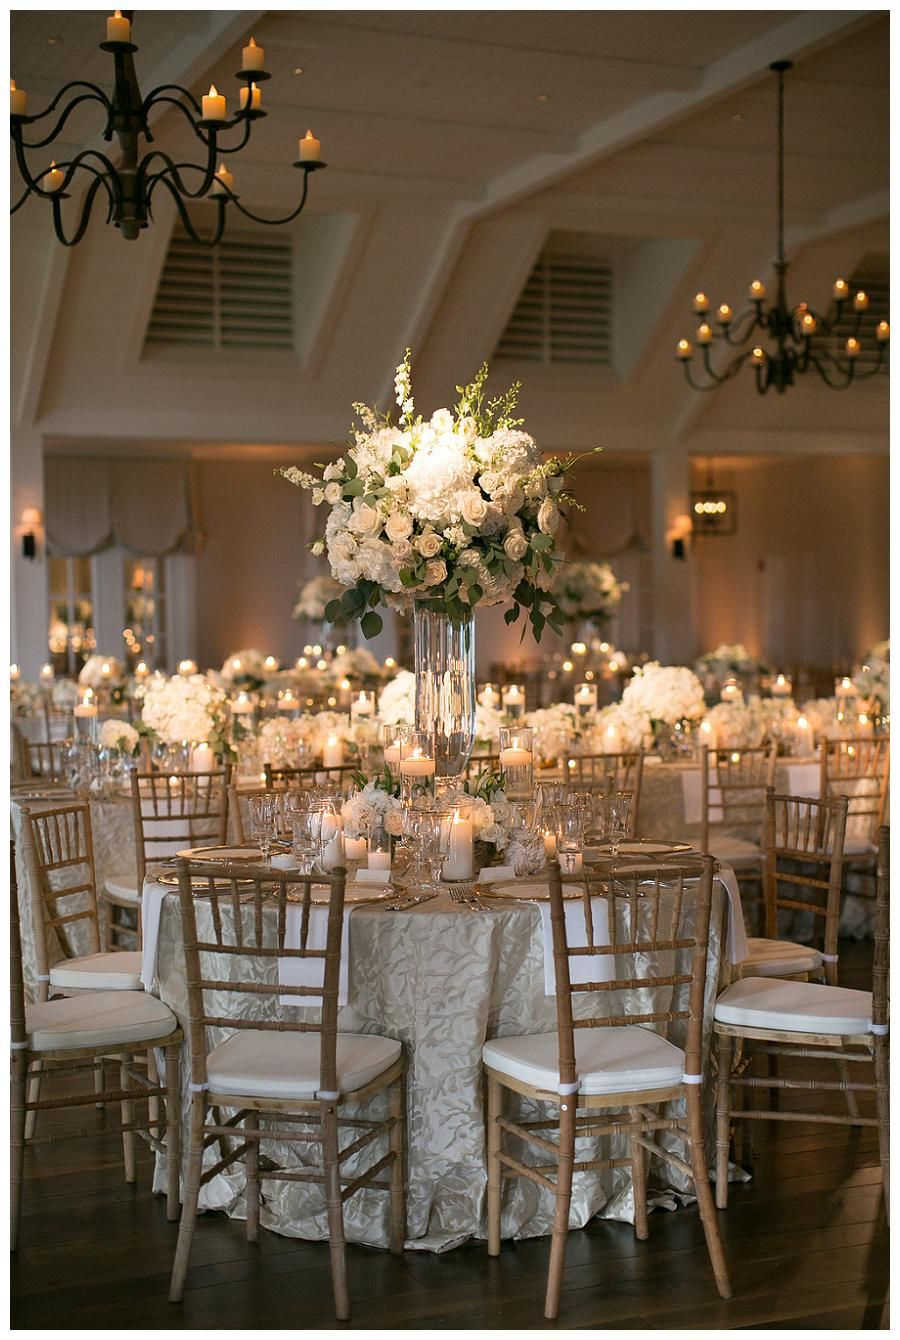 10 Awesome Rehearsal Dinner Table Decorations Ideas decorations decorations cool wedding decoration ideas table diy 2022